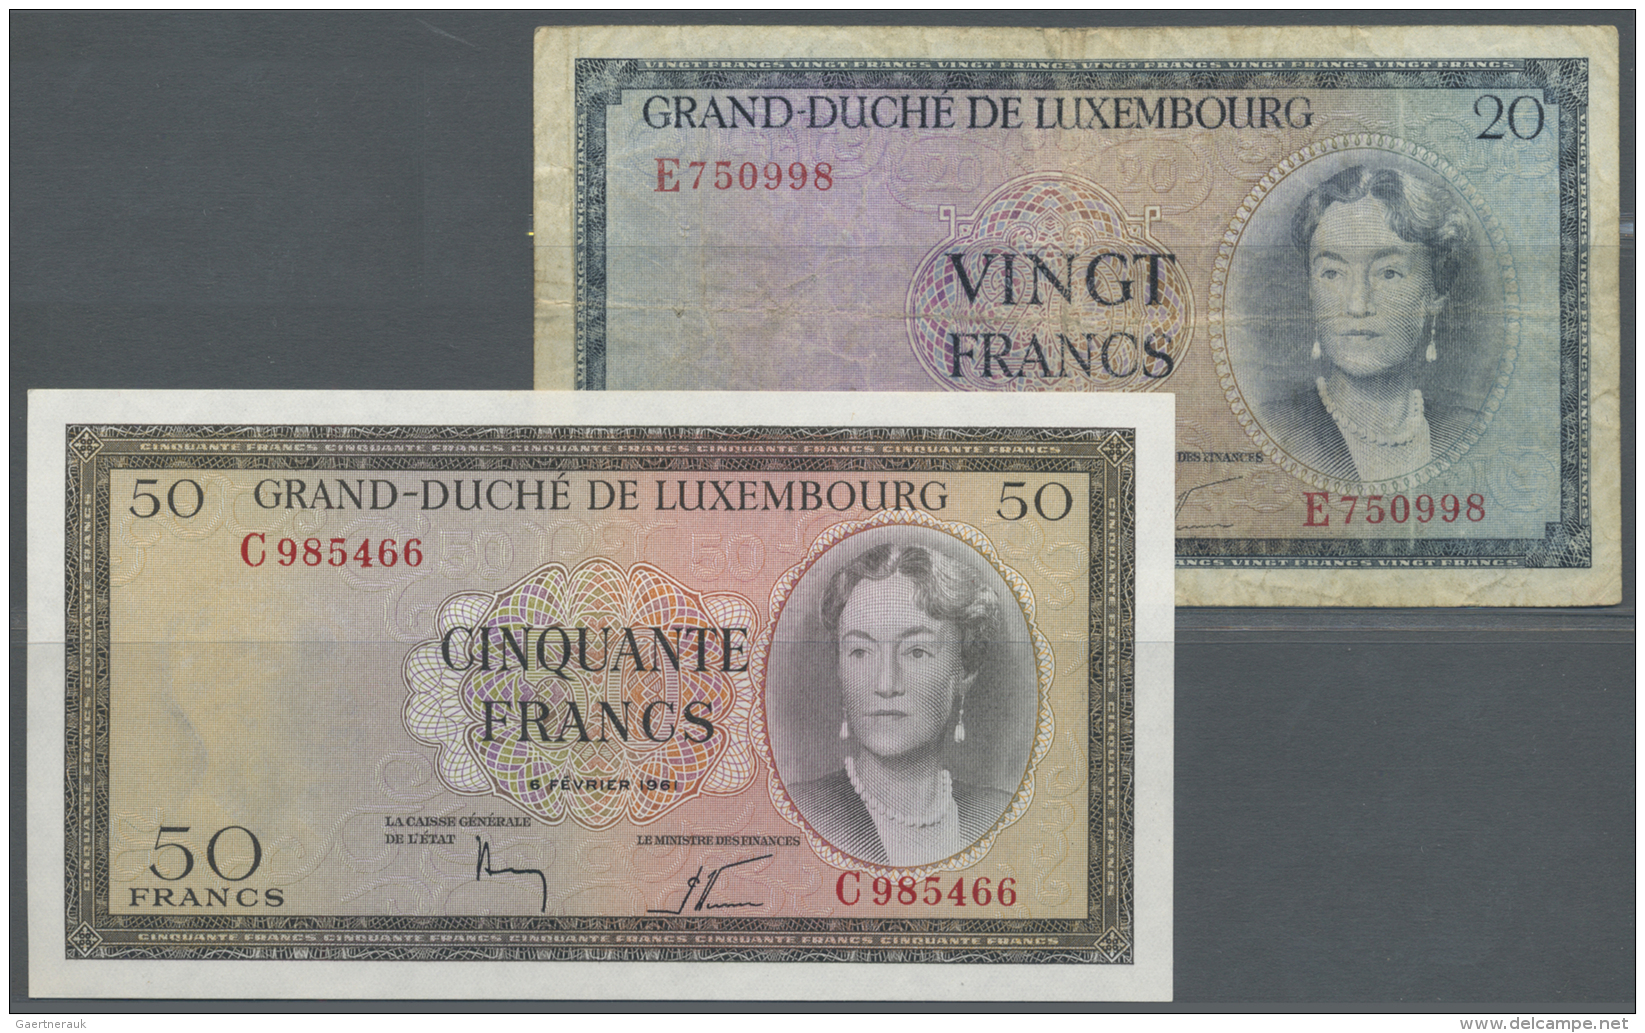 Luxembourg: Set Of 2 Notes Containing 20 Francs 1966 P. 49a (F-) And 50 Francs 1961 P. 51a (aUNC), Nice Set. (2 Pcs) - Luxembourg